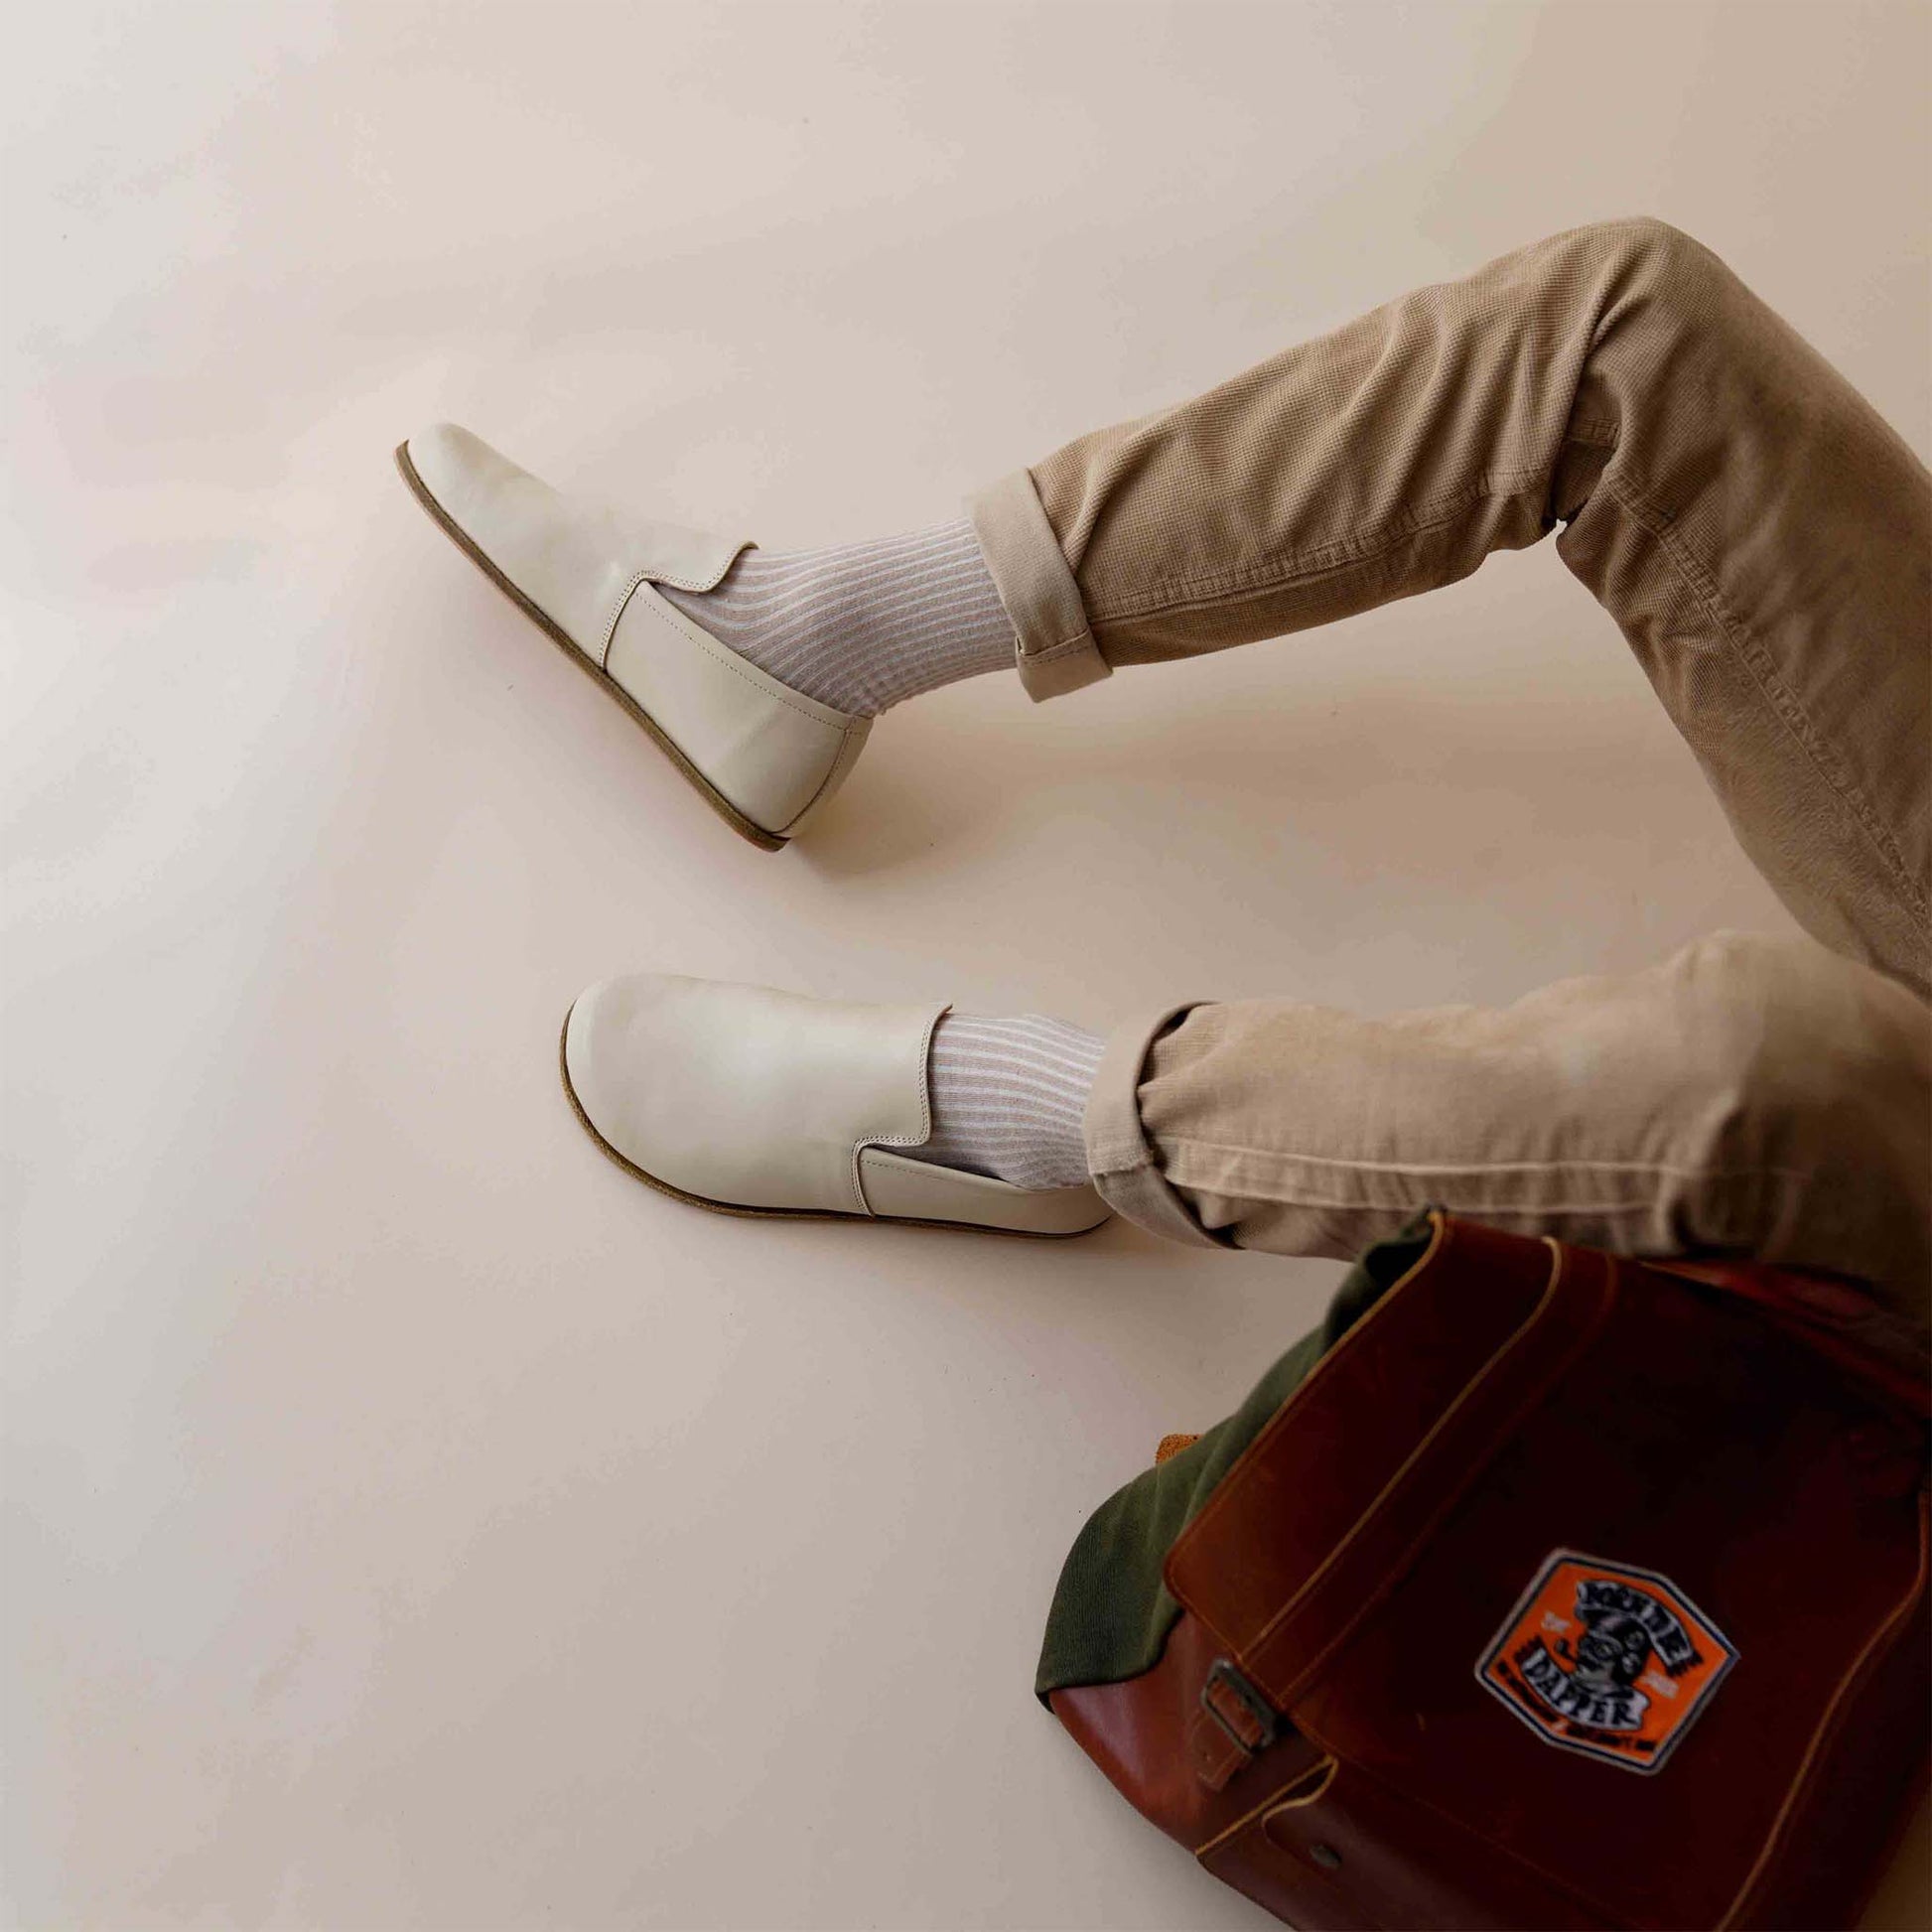 Man lounging in beige Aeolia Leather Barefoot Men's Loafers, beige pants, and white socks. Shop at pelanir.com!